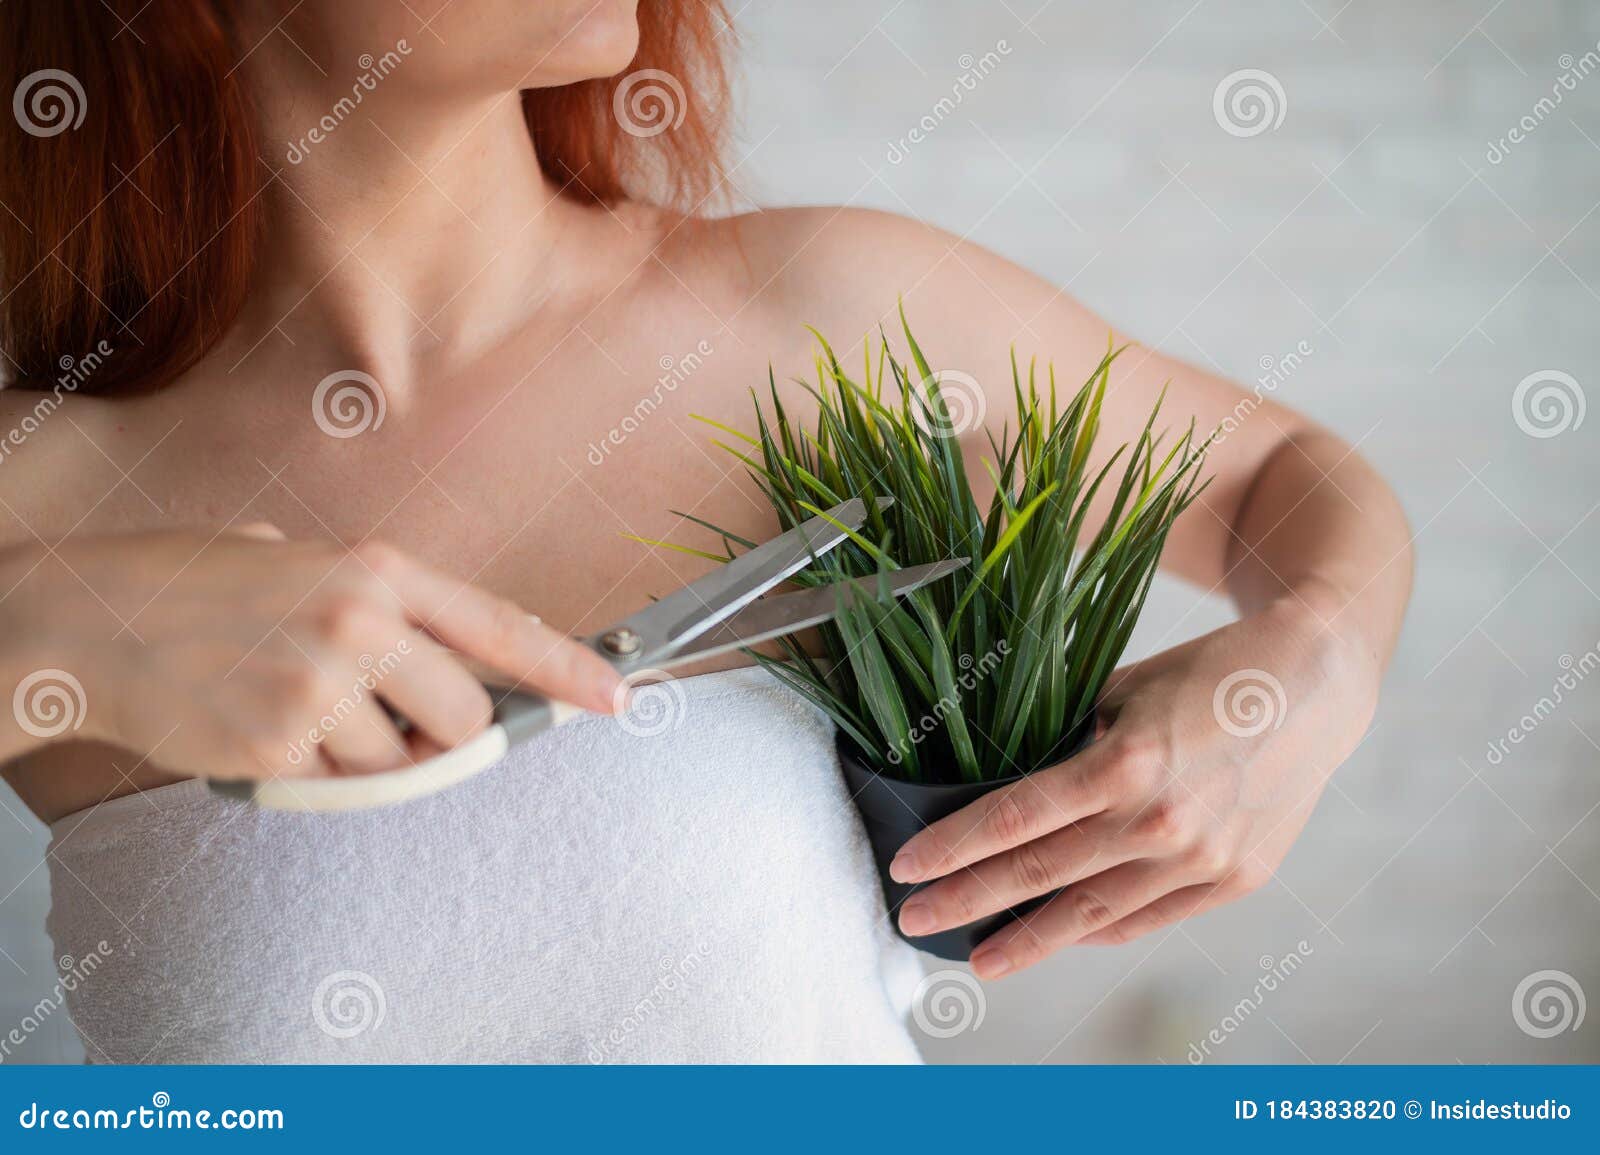 Faceless Red Haired Caucasian Woman Wrapped In A White Terry Towel Shears A Potted Plant With Scissors Armpit Hair Stock Photo Image Of Cosmetology Razor 184383820